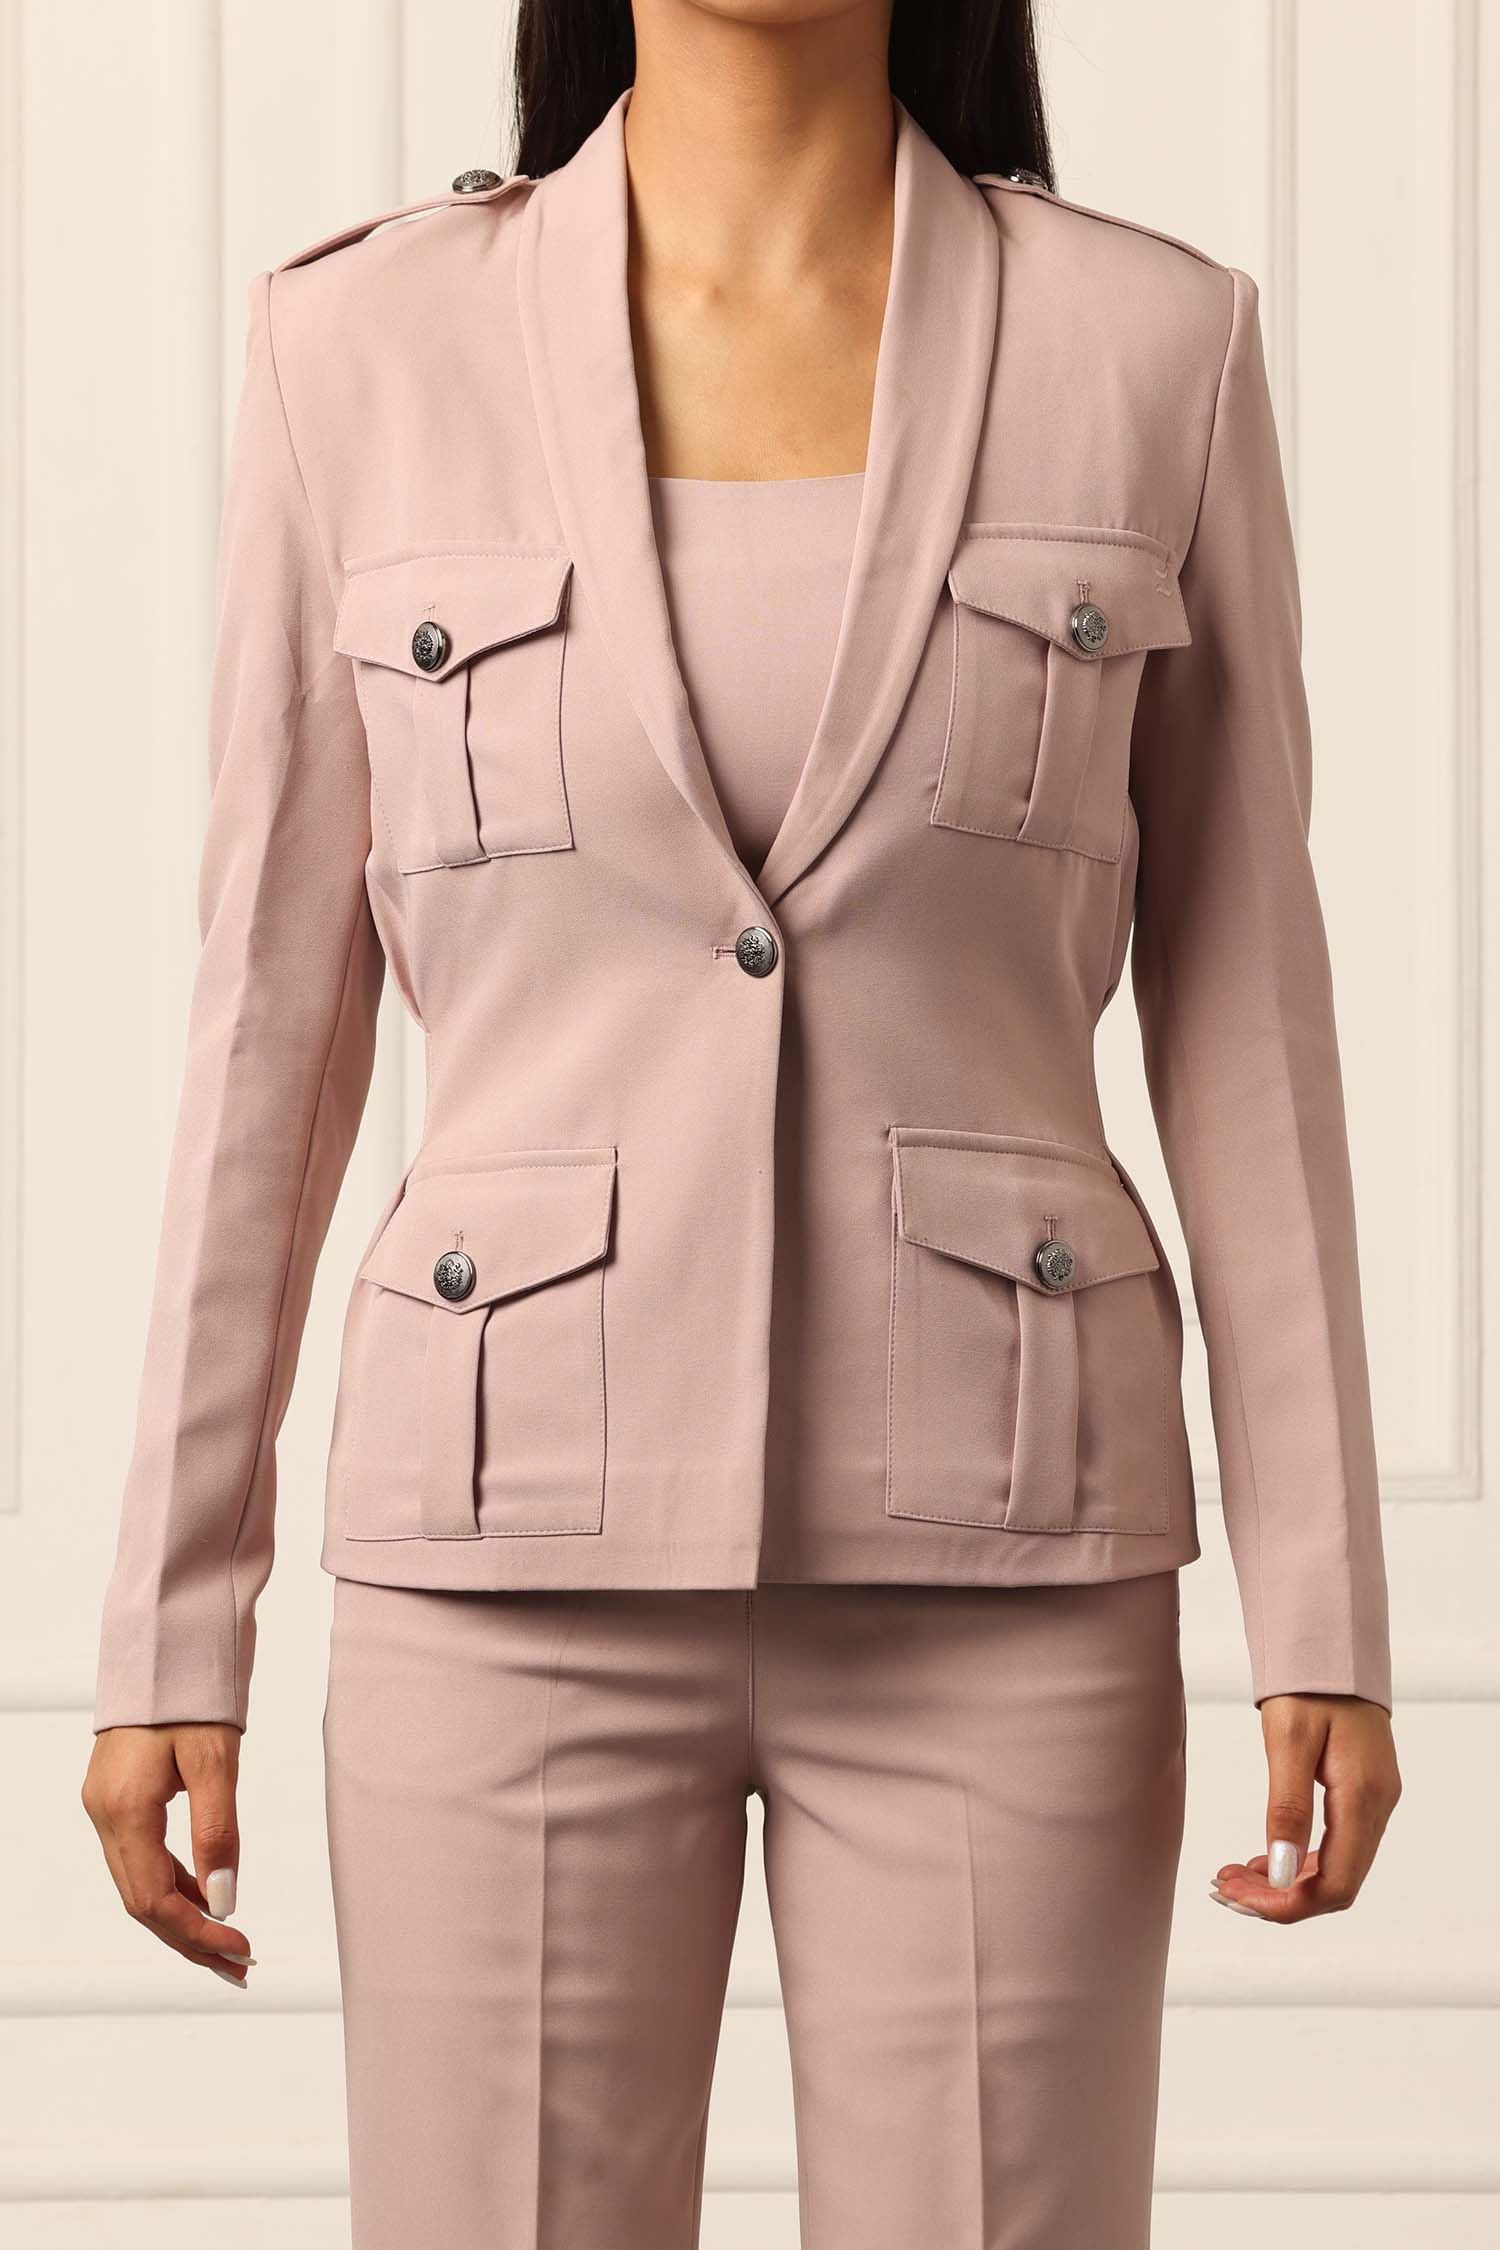 Box Pleated Blossom Pink Blazer With Trousers